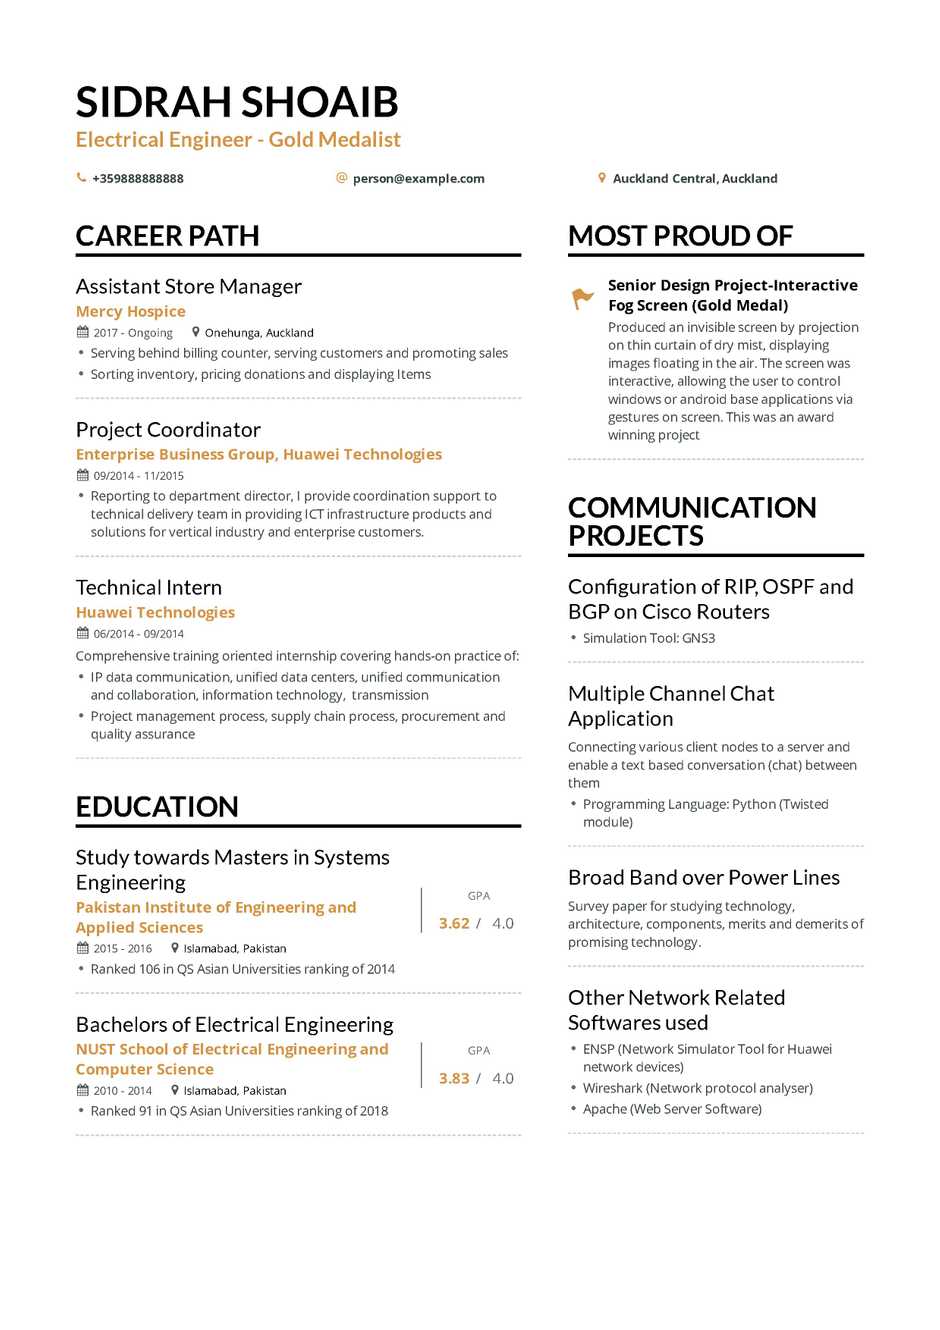 Example Of A Resume Electrical Engineering Resume example of a resume|wikiresume.com